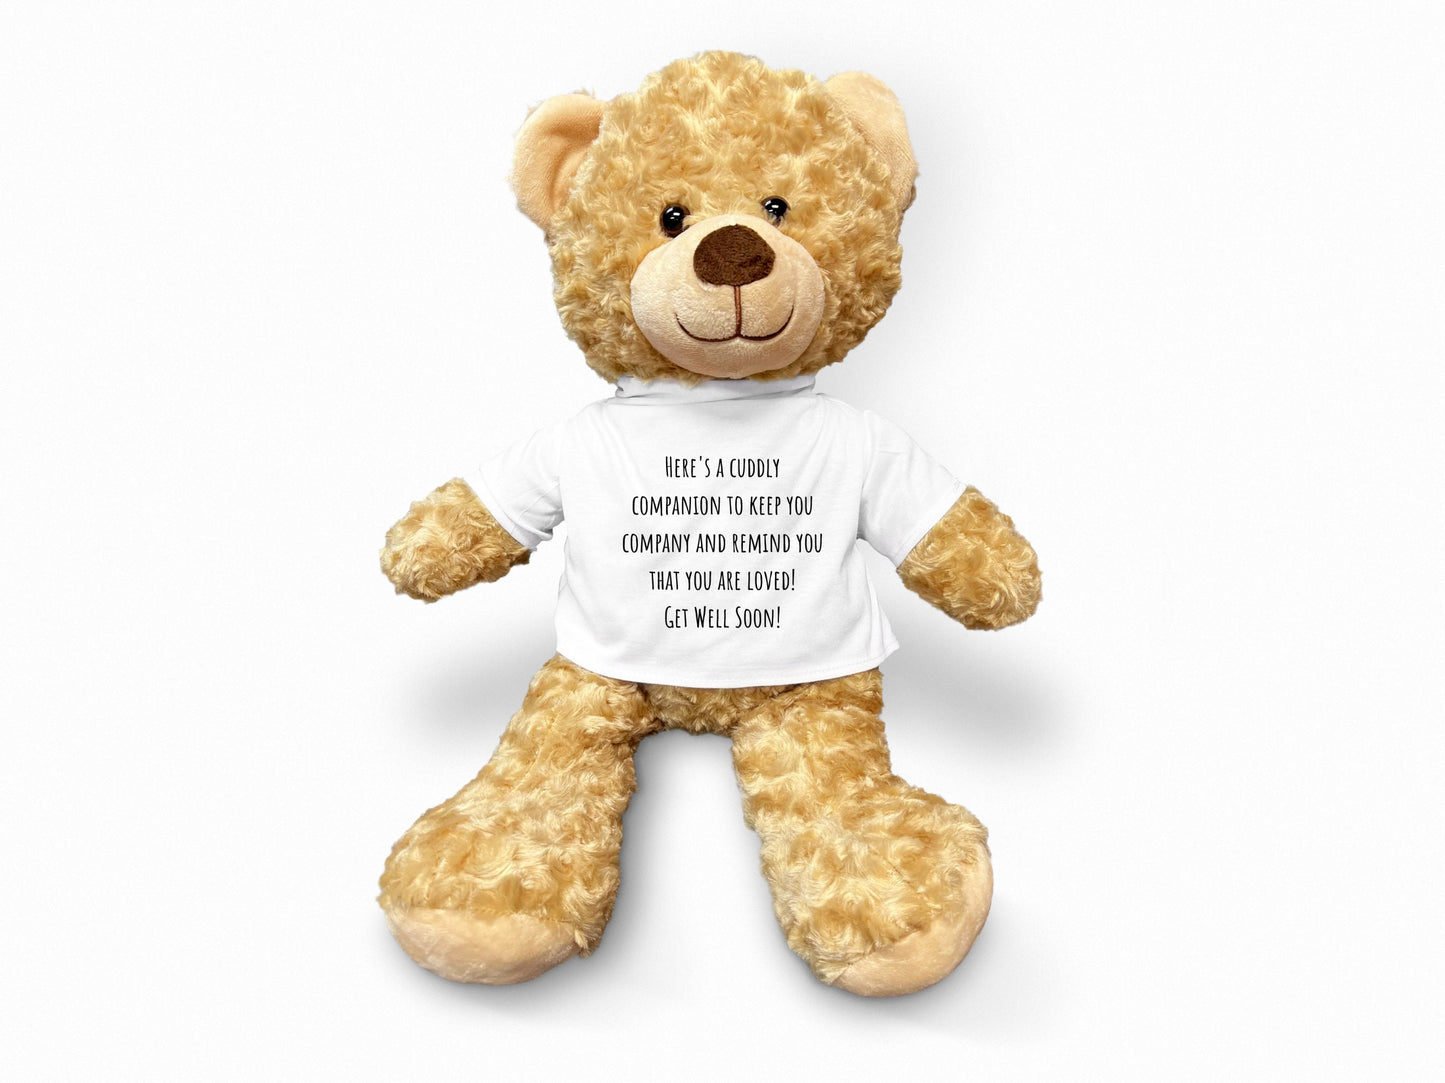 Cute and Cuddly Get Well Teddy Bear – Perfect Gift for a Speedy Recovery! Get Well Teddy Bear, Teddy Bear For Men, Get Well Soon